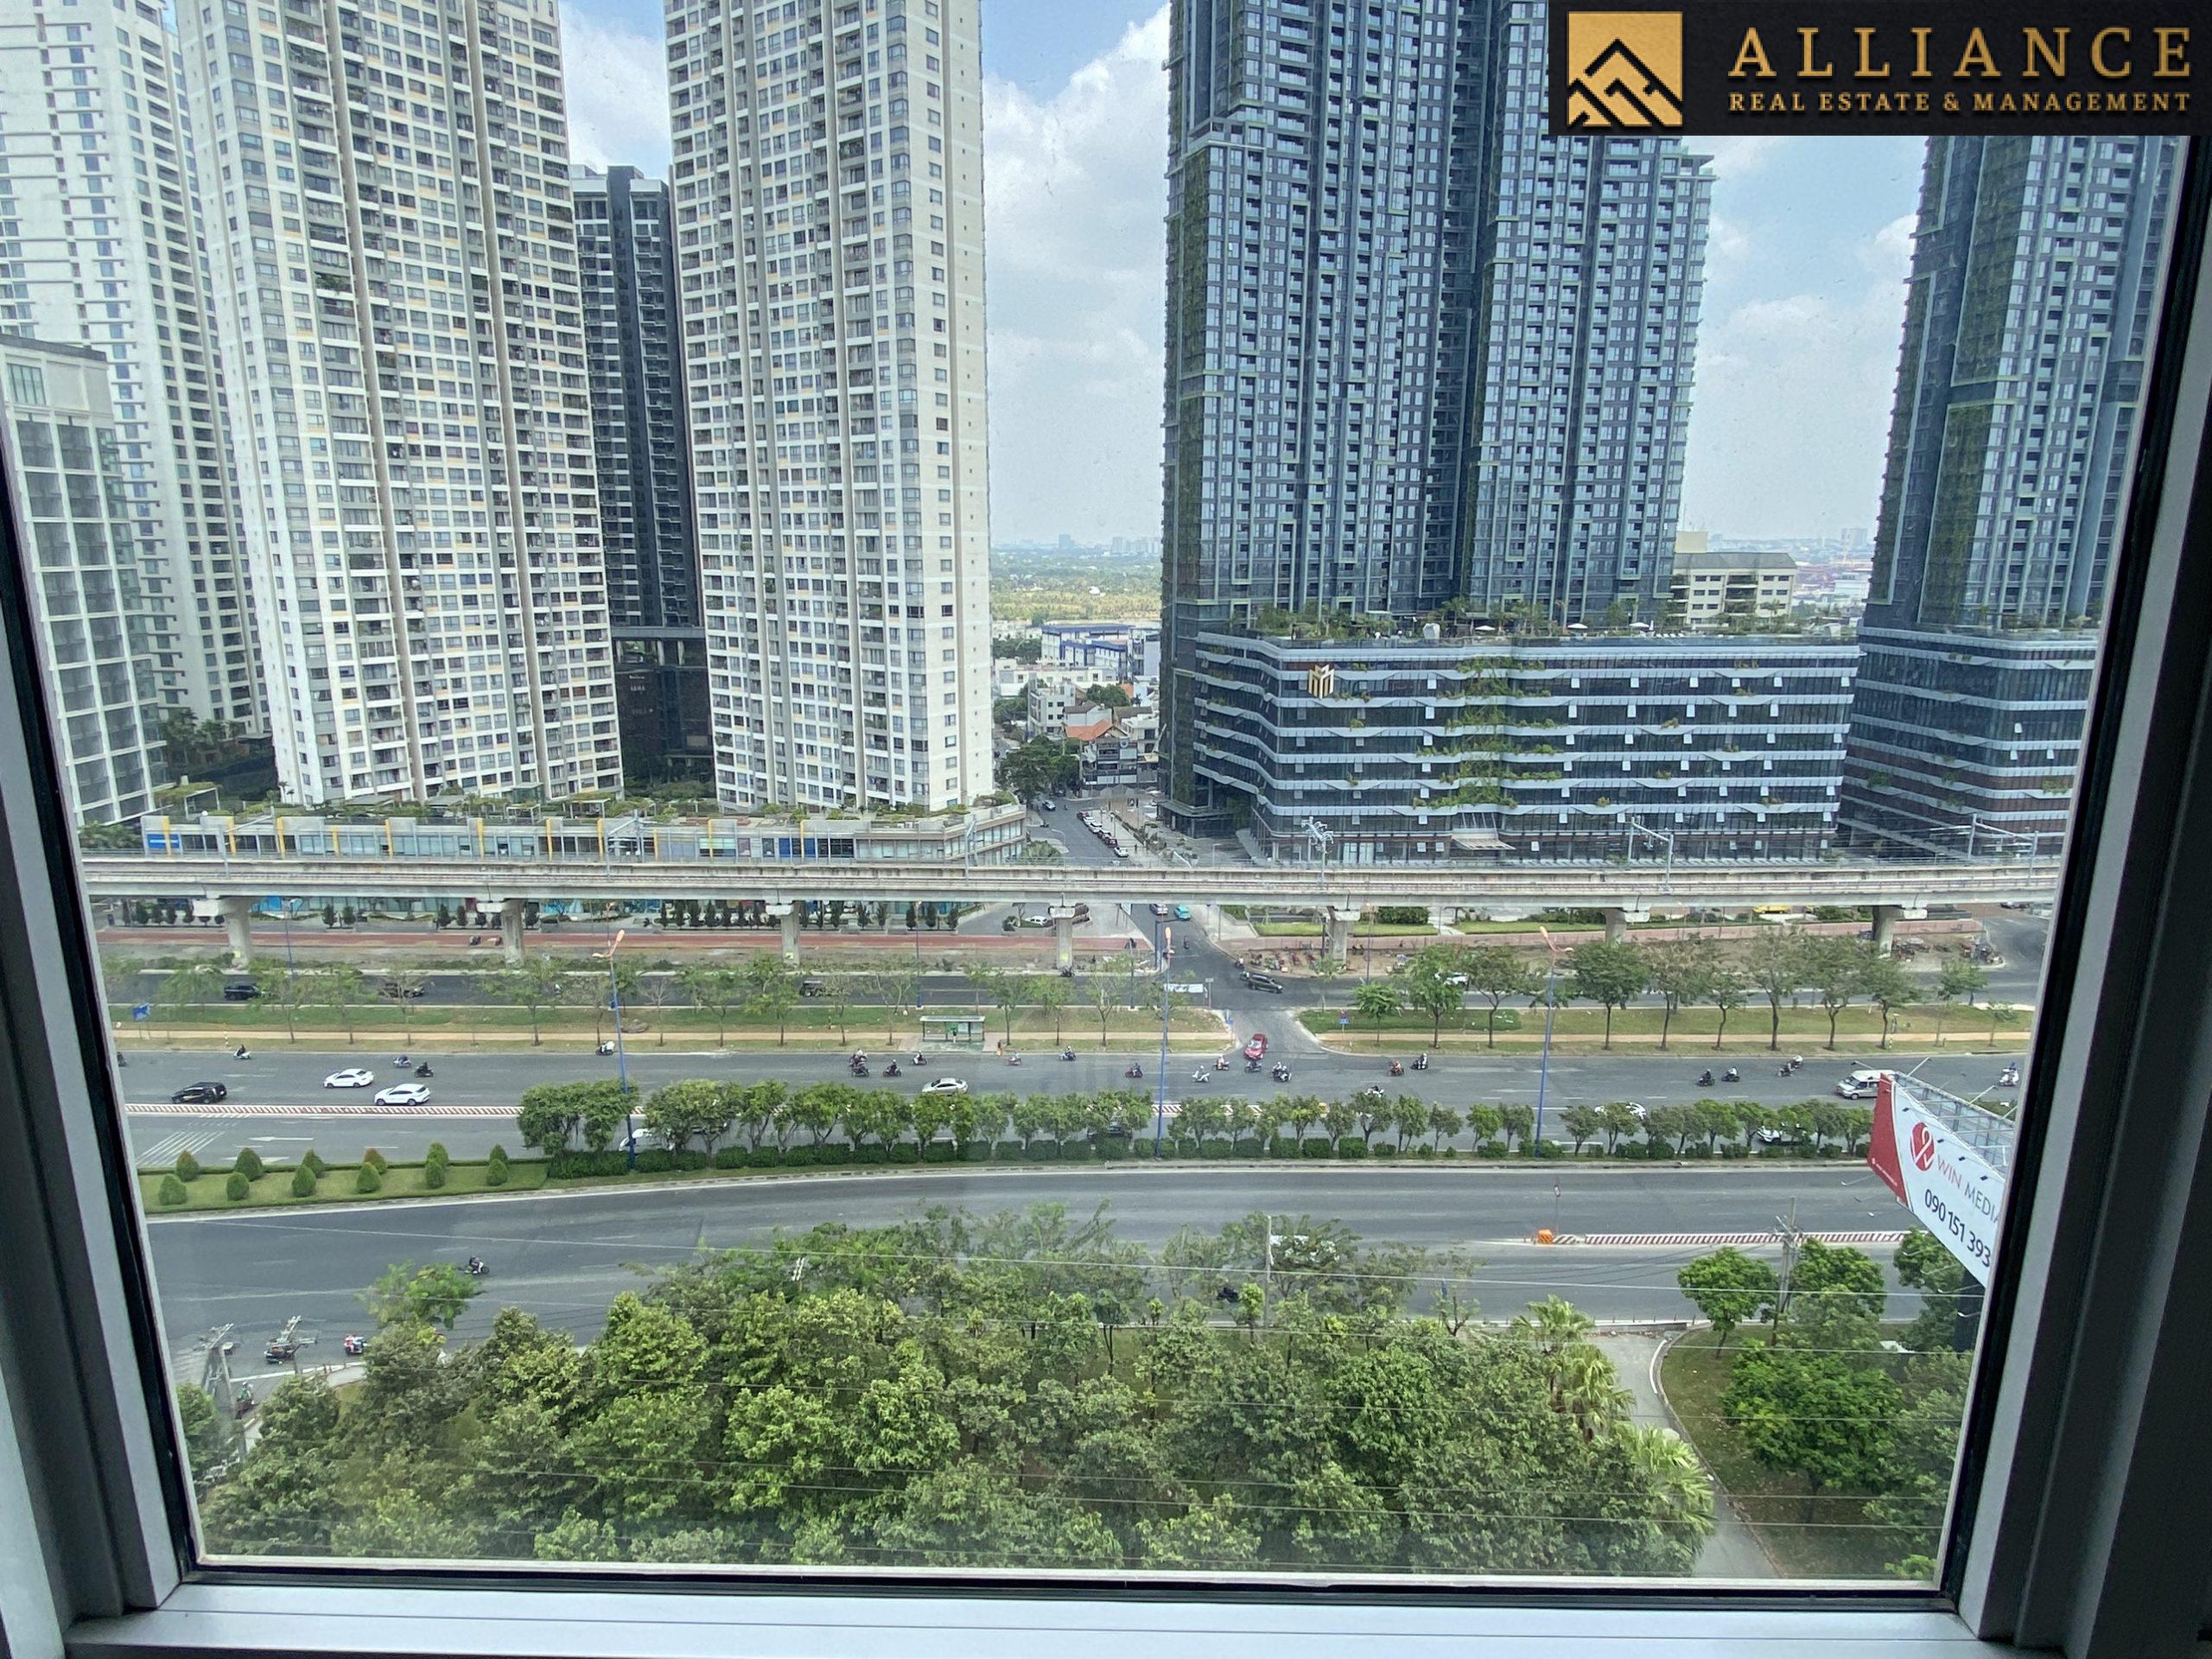 3 Bedroom Apartment (Estella Heights) for rent in An Phu Ward, Thu Duc City, HCM City.